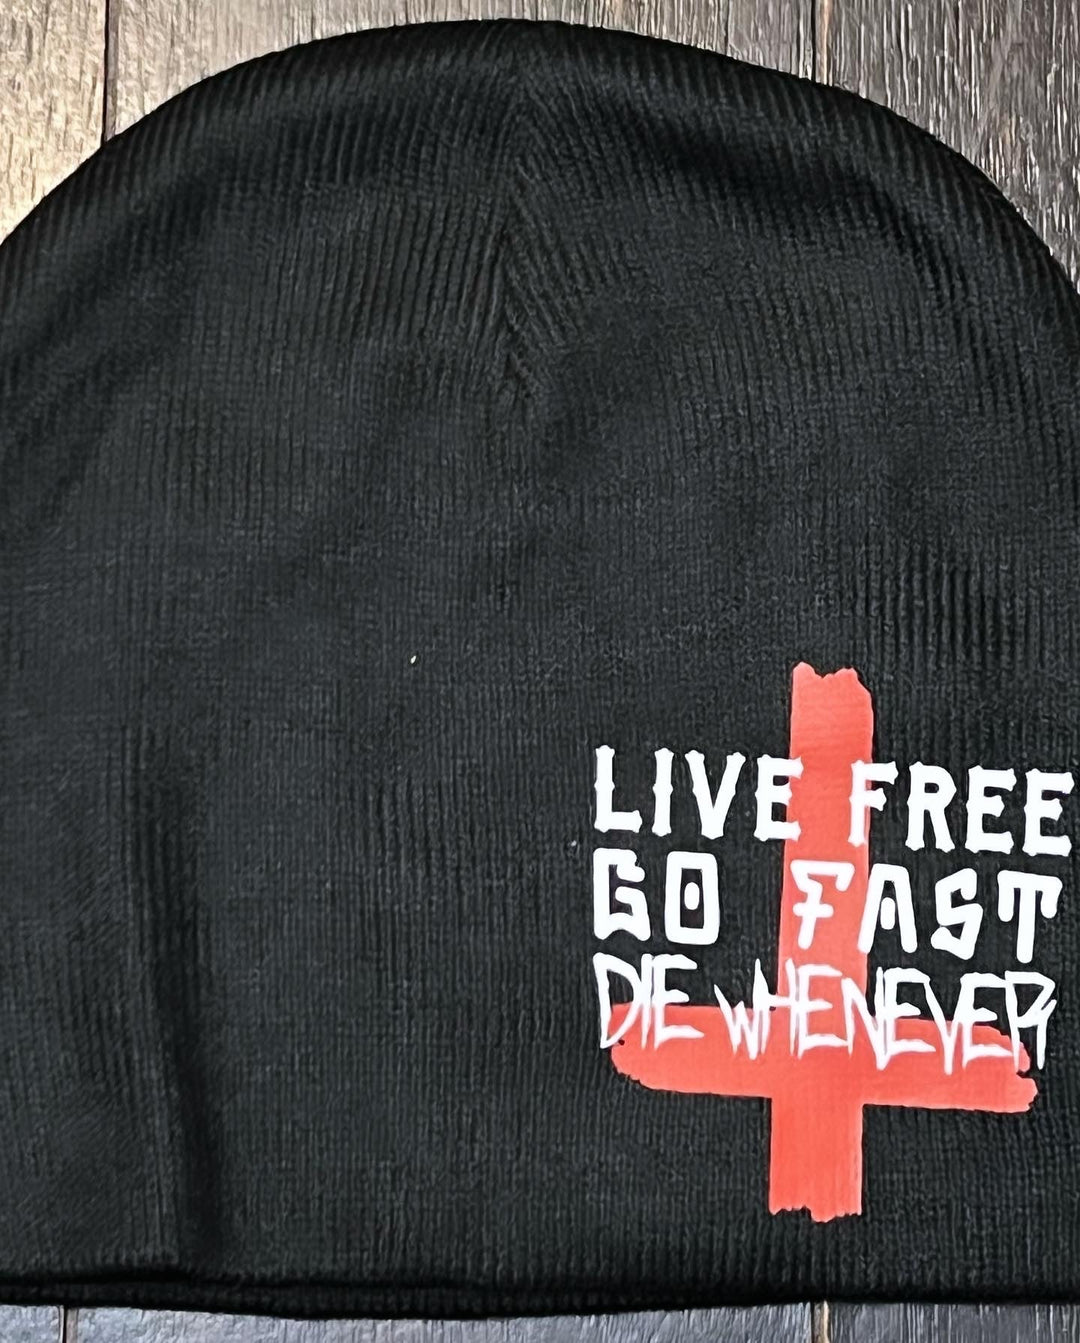 Live Free Go Fast Die Whenever Beanie - For the winter